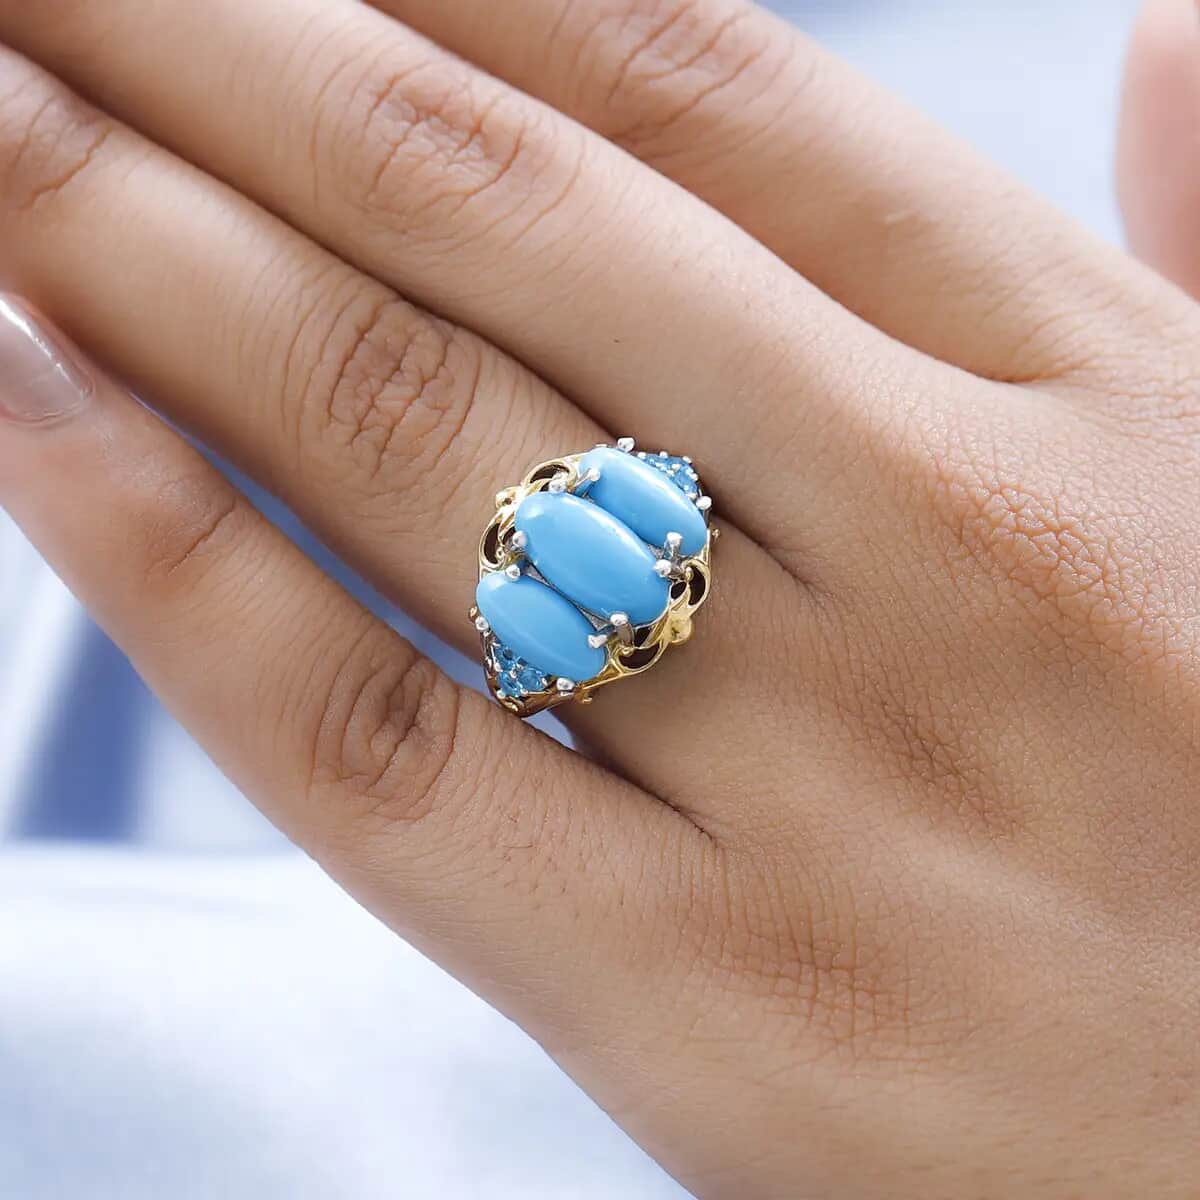 Premium Sleeping Beauty Turquoise Ring with Malgache Neon Apatite in Vermeil YG and Platinum Over Sterling Silver, Statement Rings For Women 4.50 ctw (Size 8.0) image number 5